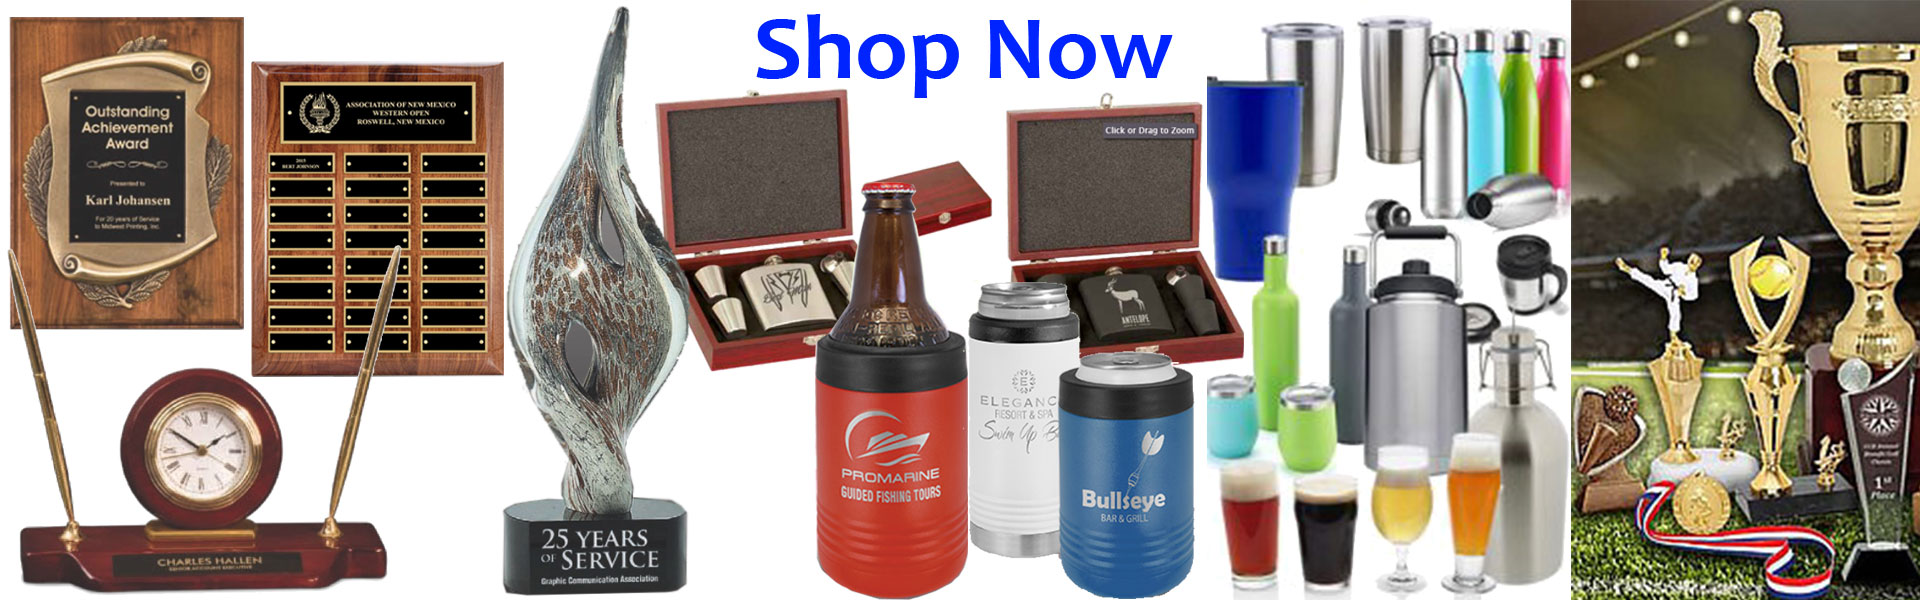 personalized gifts, Shop for Personalization Gifts